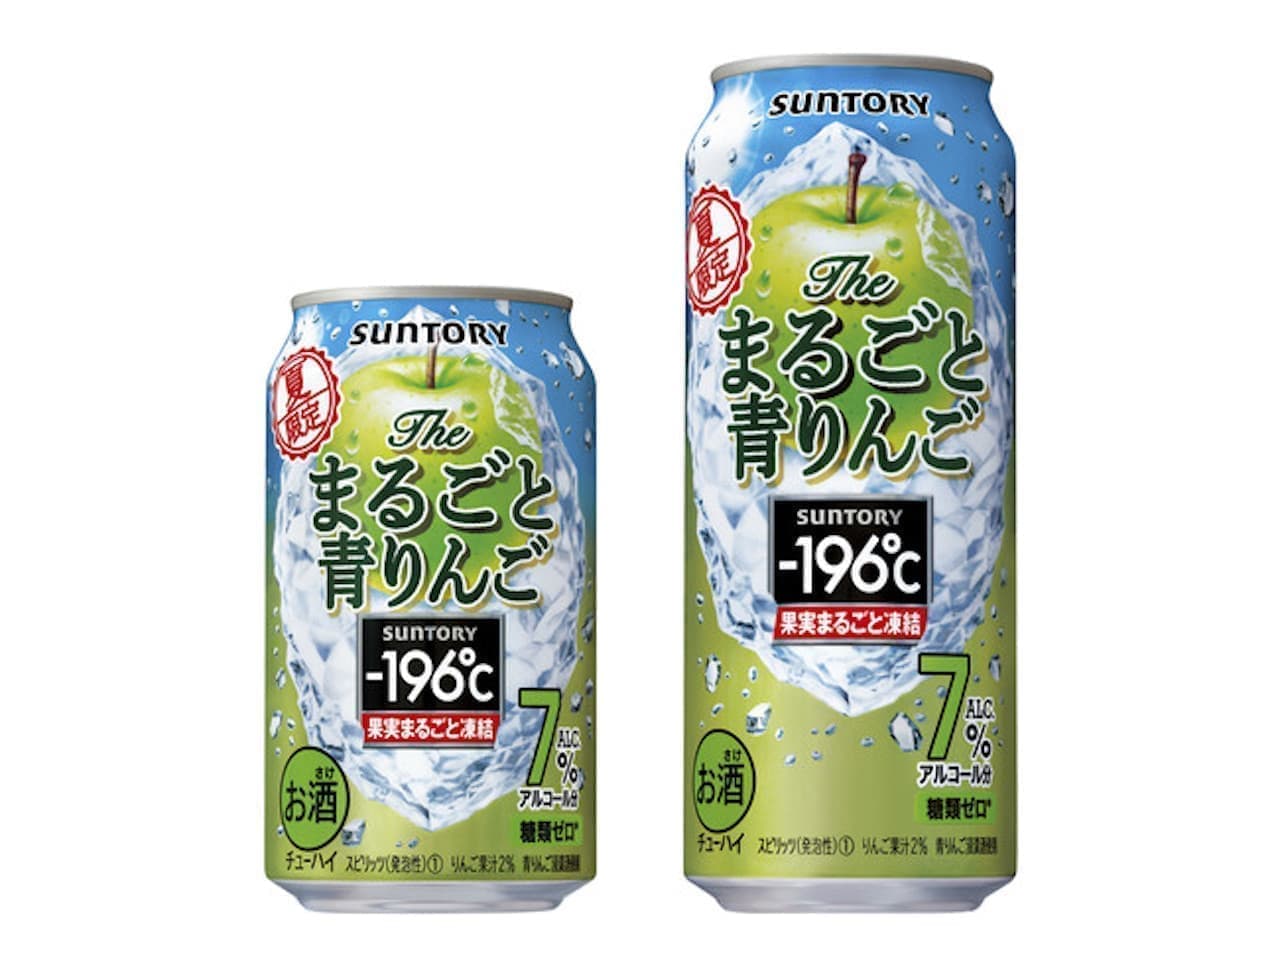 For a limited time "-196 ℃ [The whole green apple]"